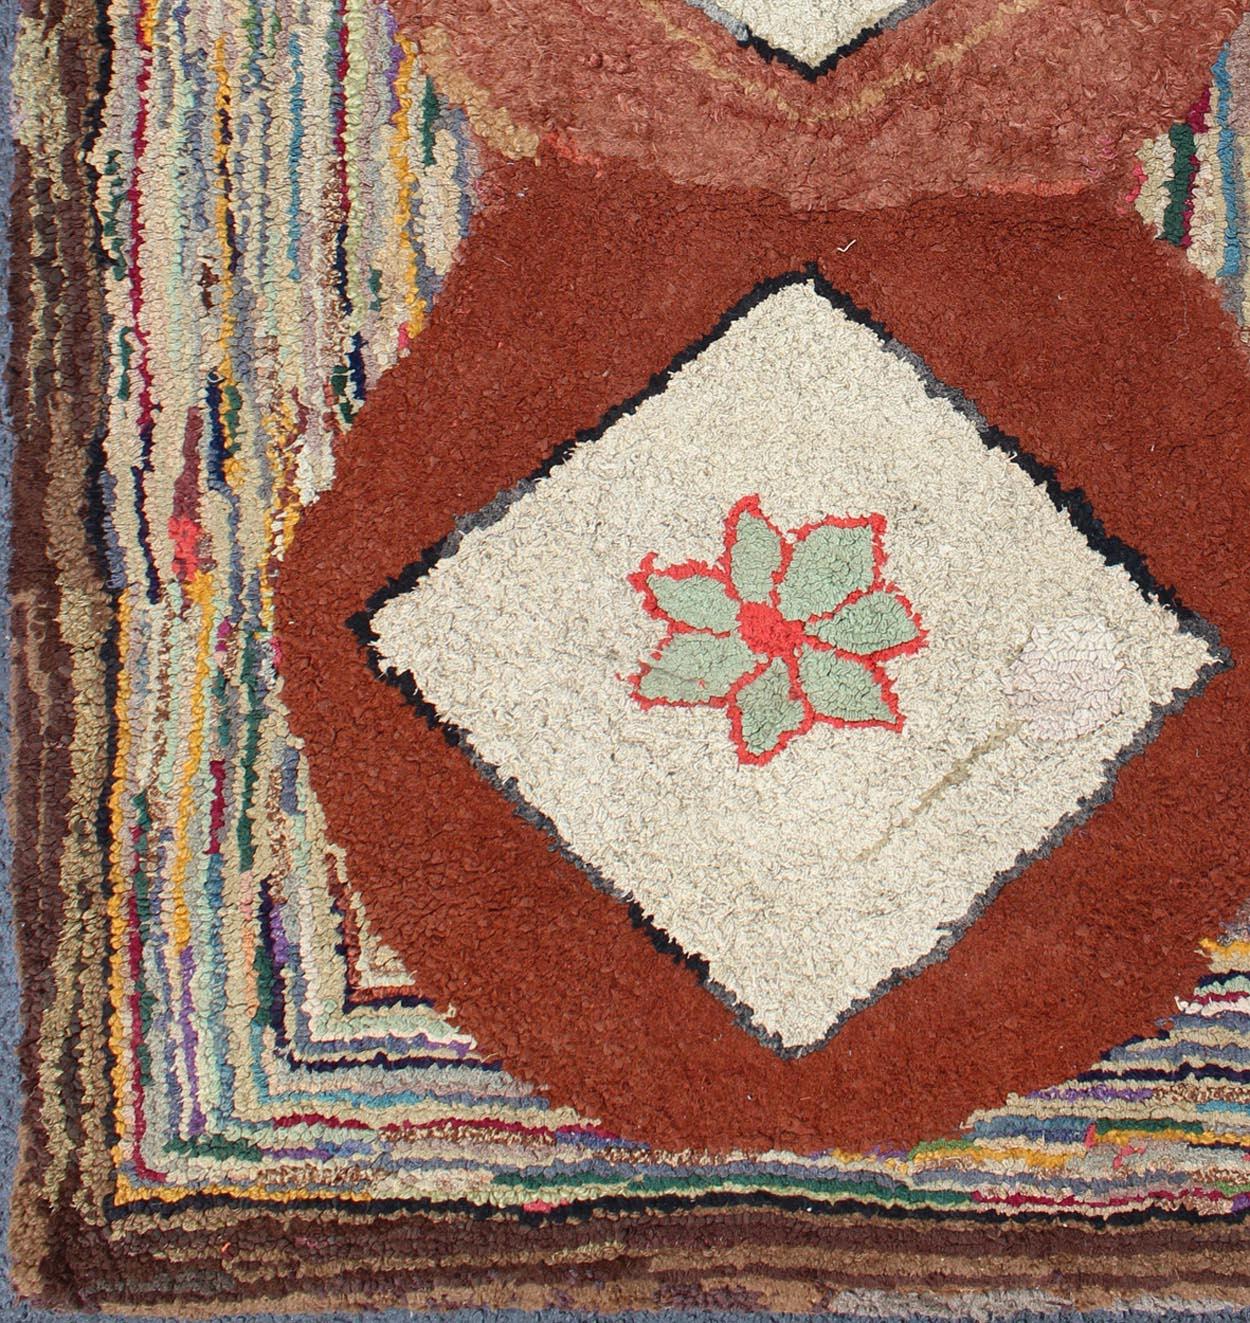 American hooked rugs are indigenous to the Northeast region of the United States and Eastern Canada. Their production began in the mid-1800s, gradually spreading lower in to North America. Hooked rugs were made from any scrap material available and